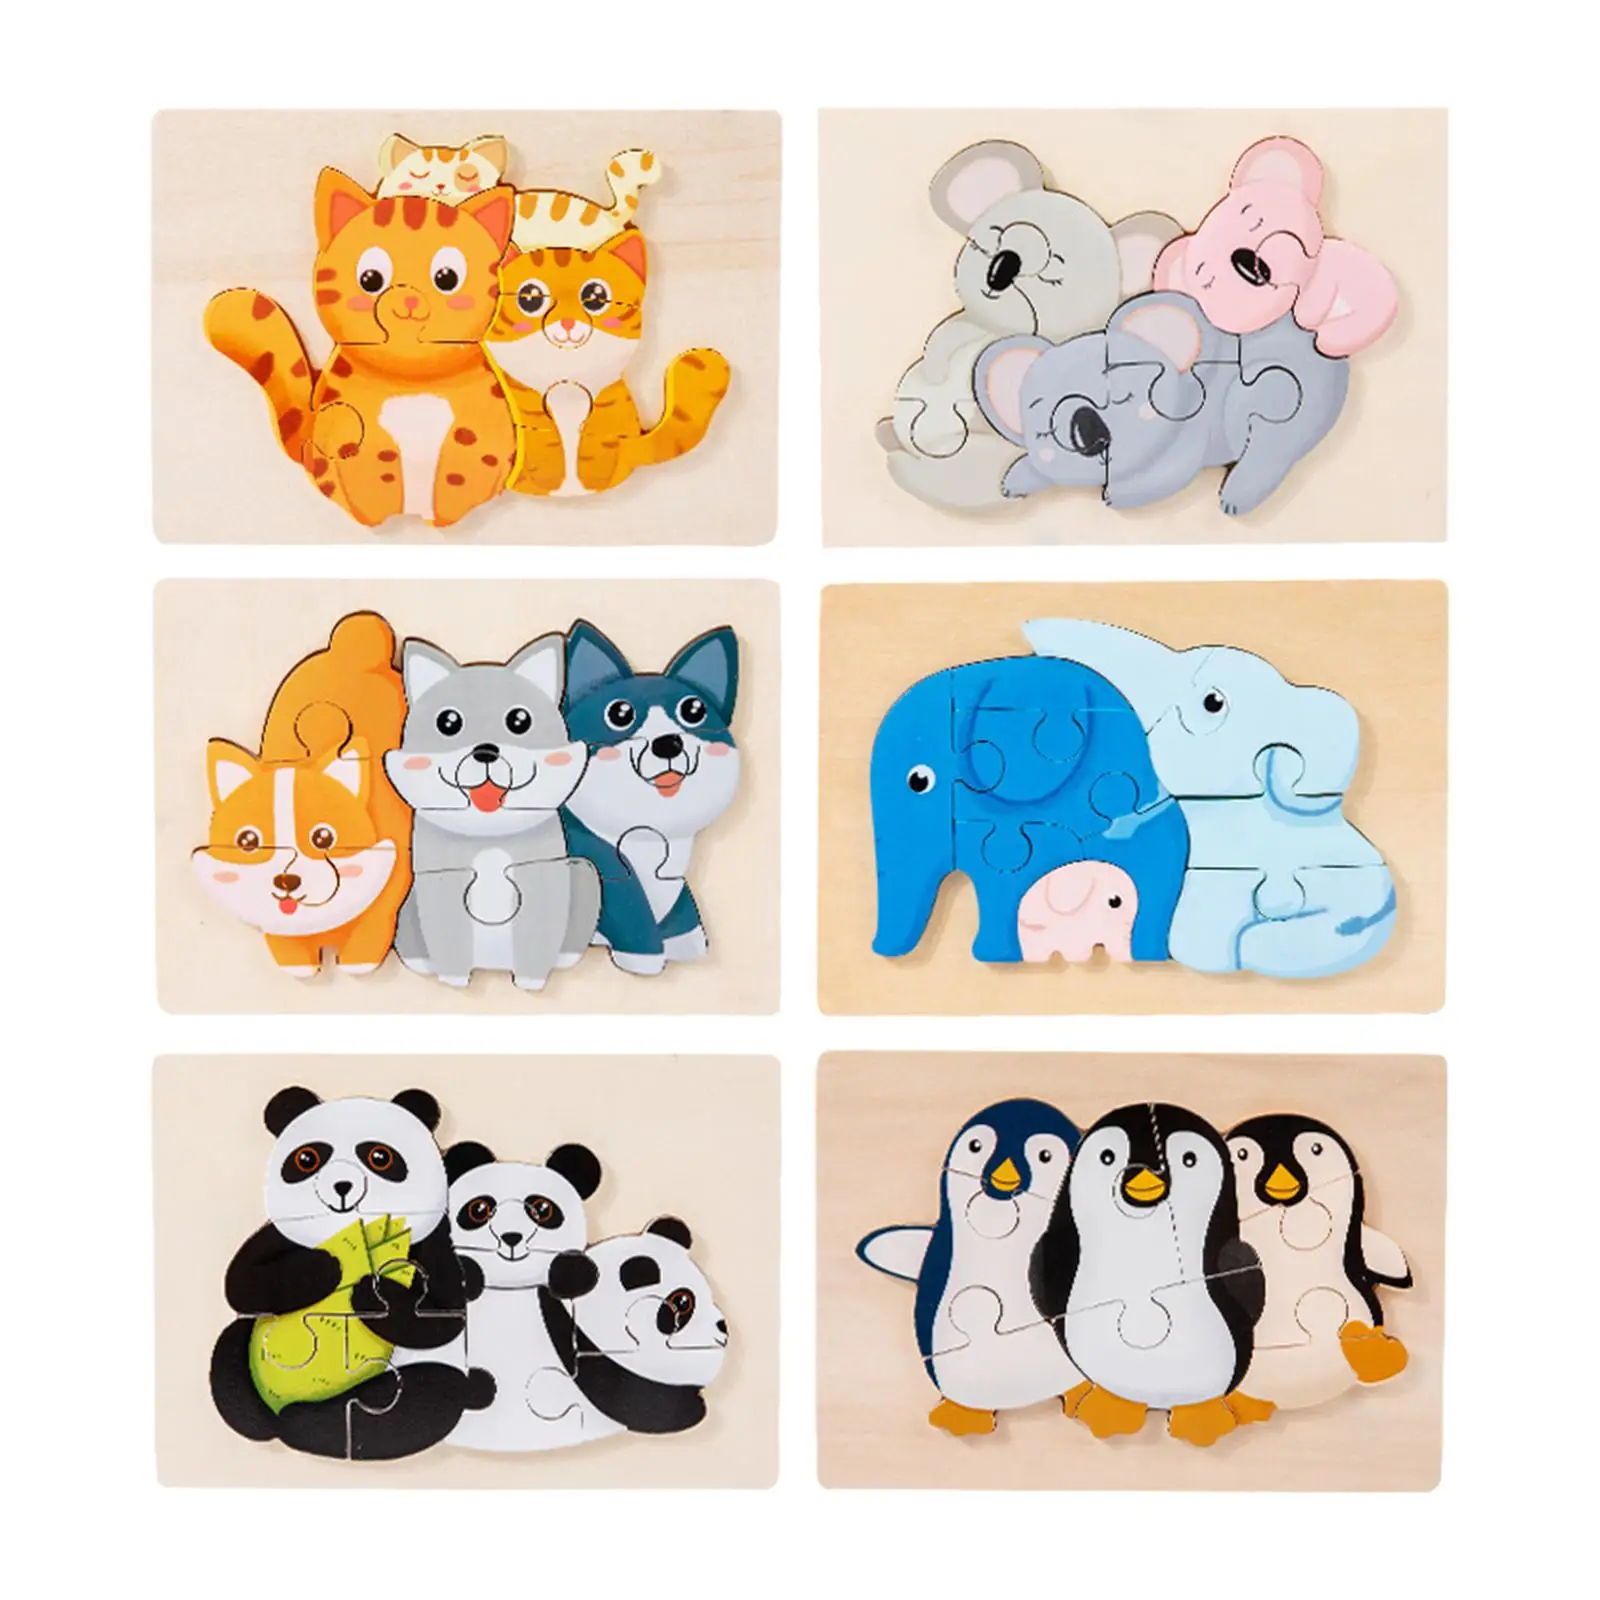 Montessori Animal Jigsaw Puzzles Educational Developmental Toy Cognition Intelligence Puzzle for Toddlers Kids Girls Preschool